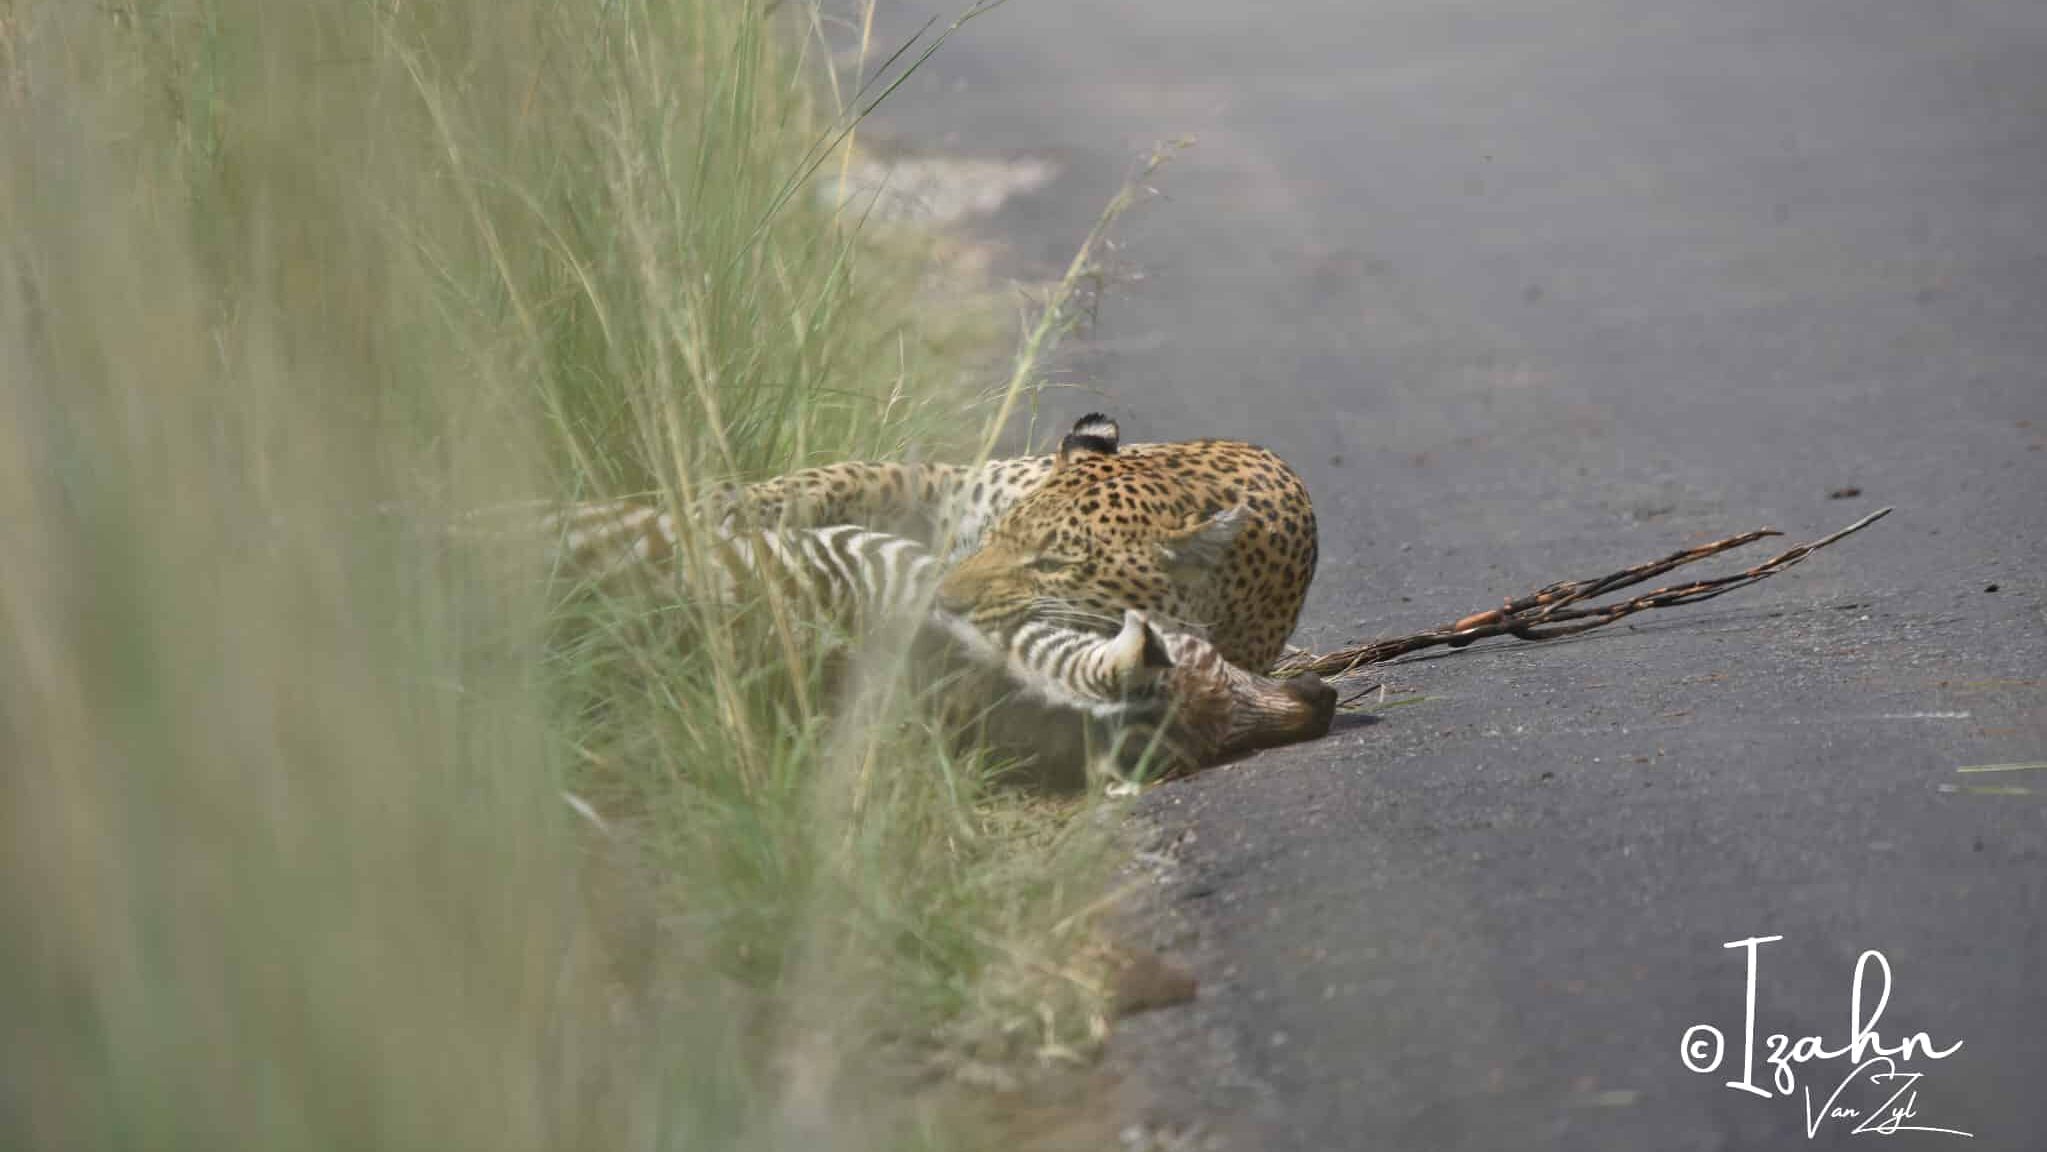 Leopard Causes Baby Zebra To Slip on Road